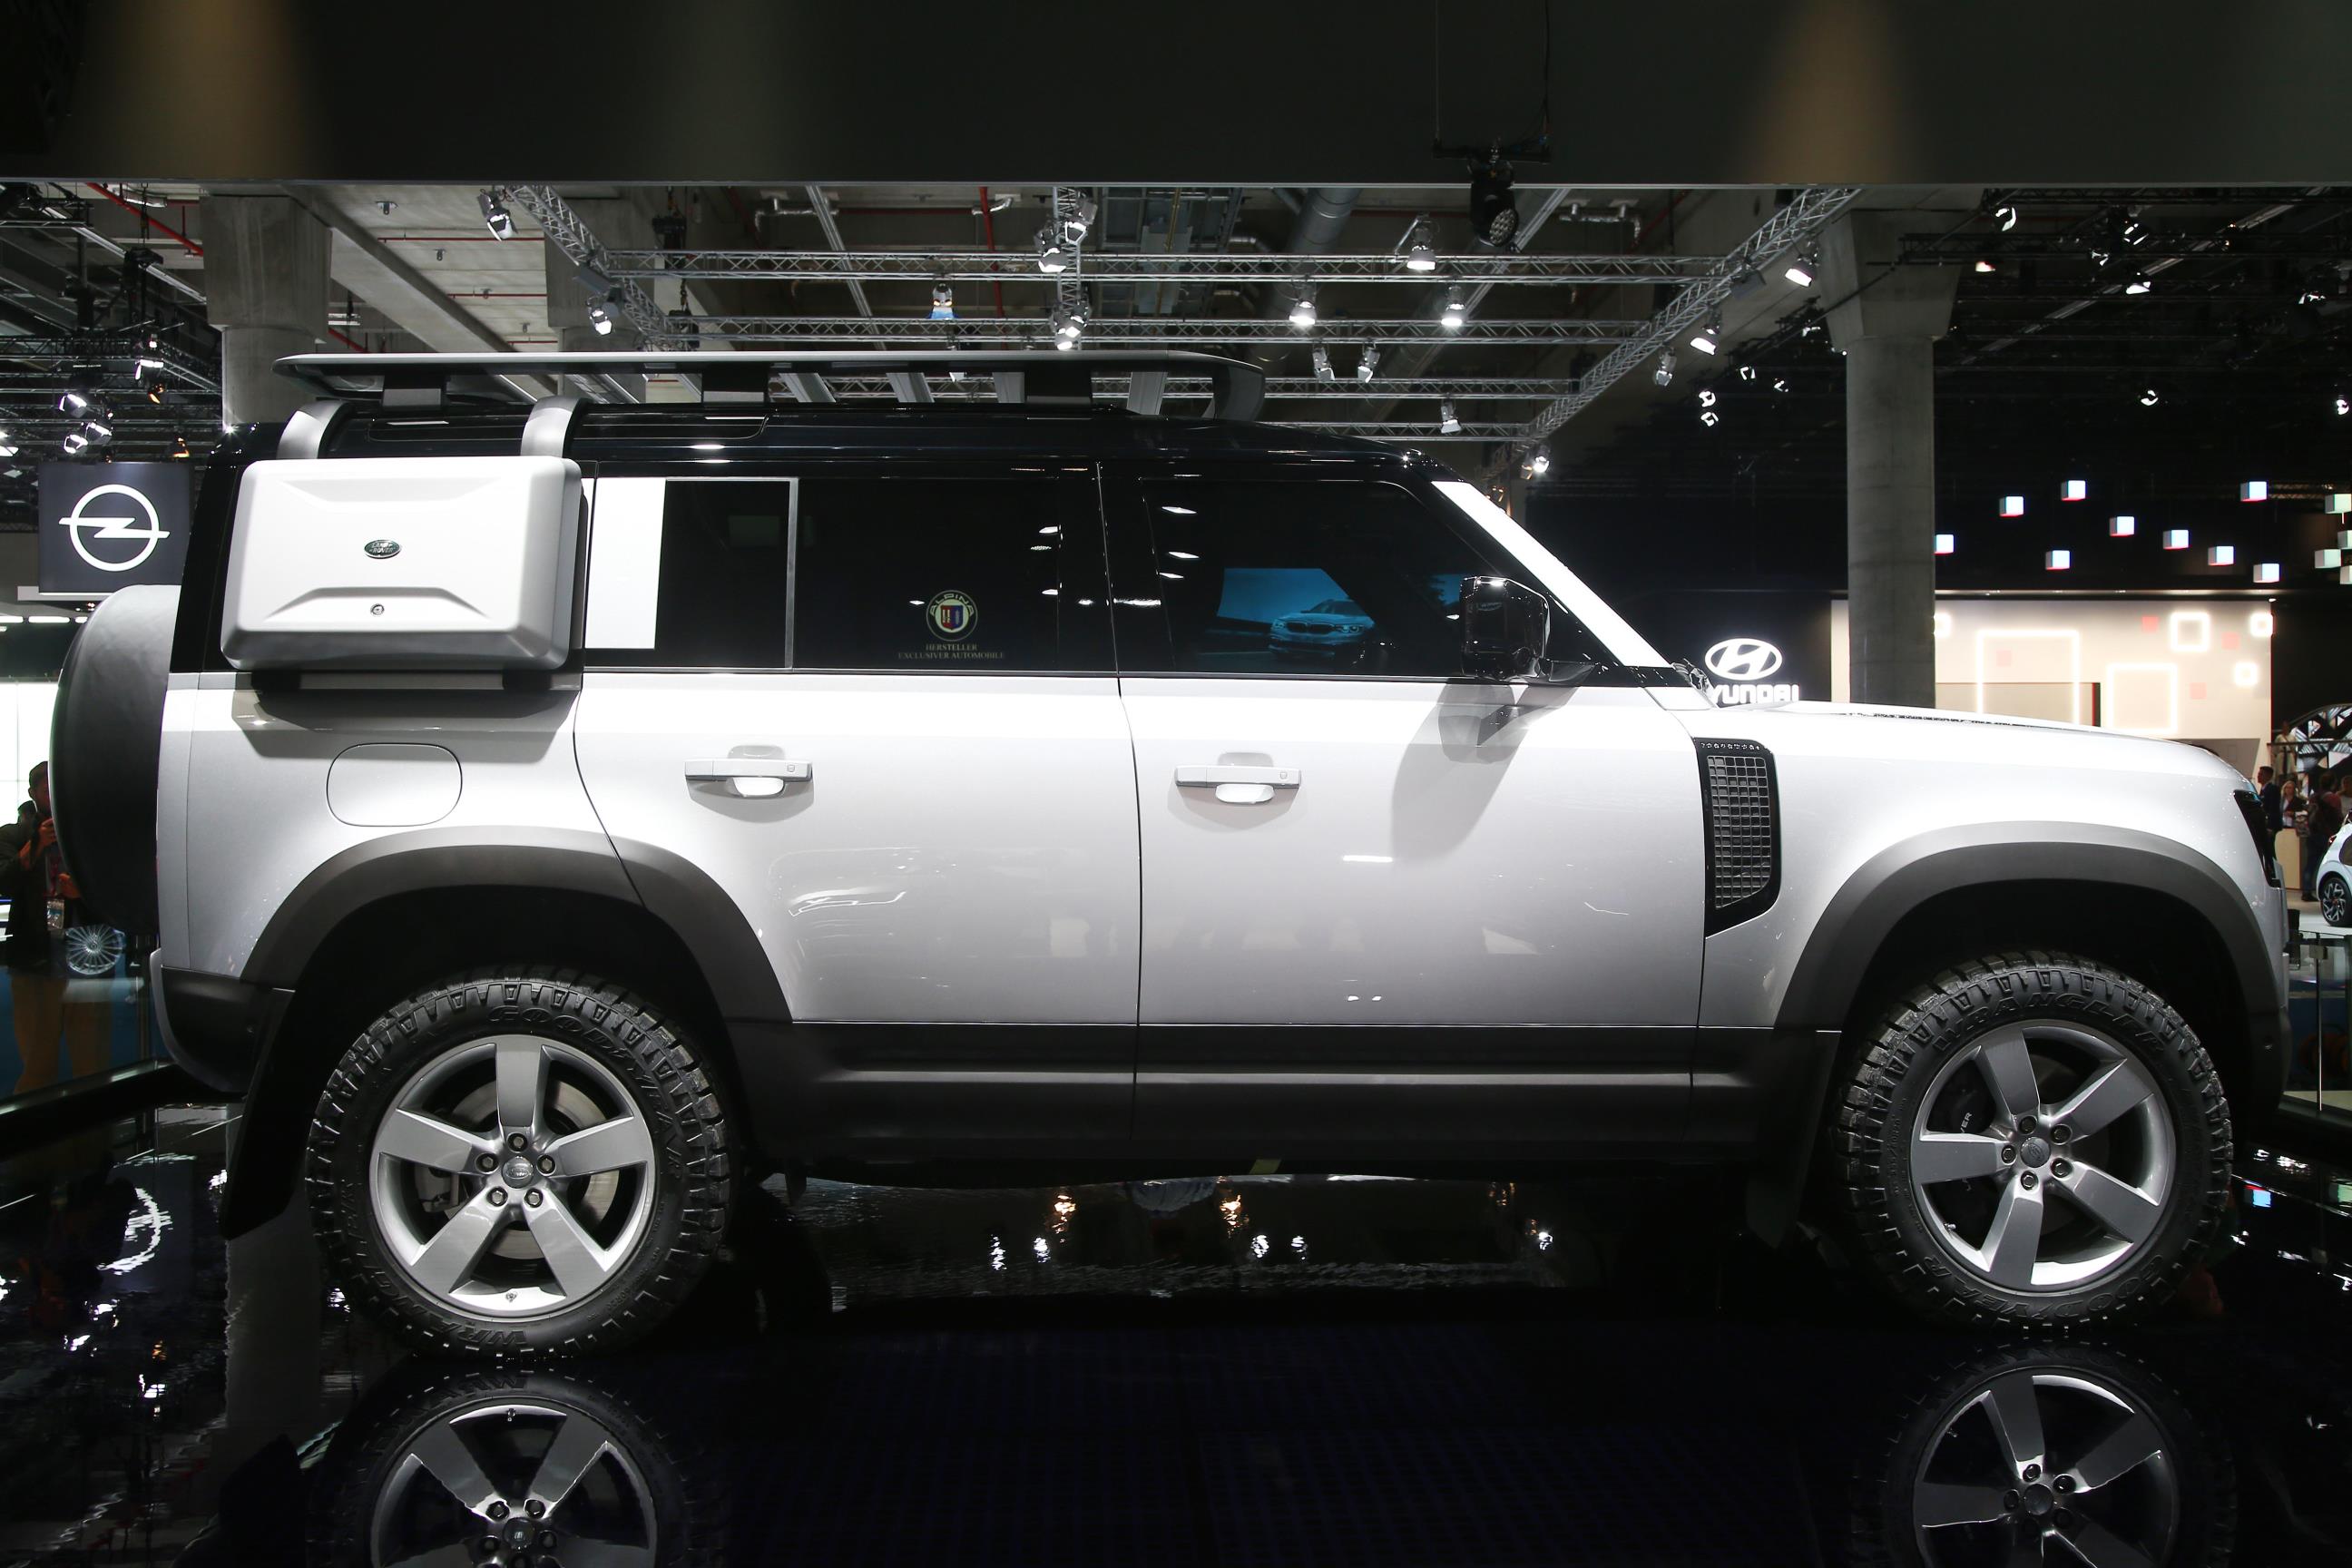 2020 Land Rover Defender 110 Side View